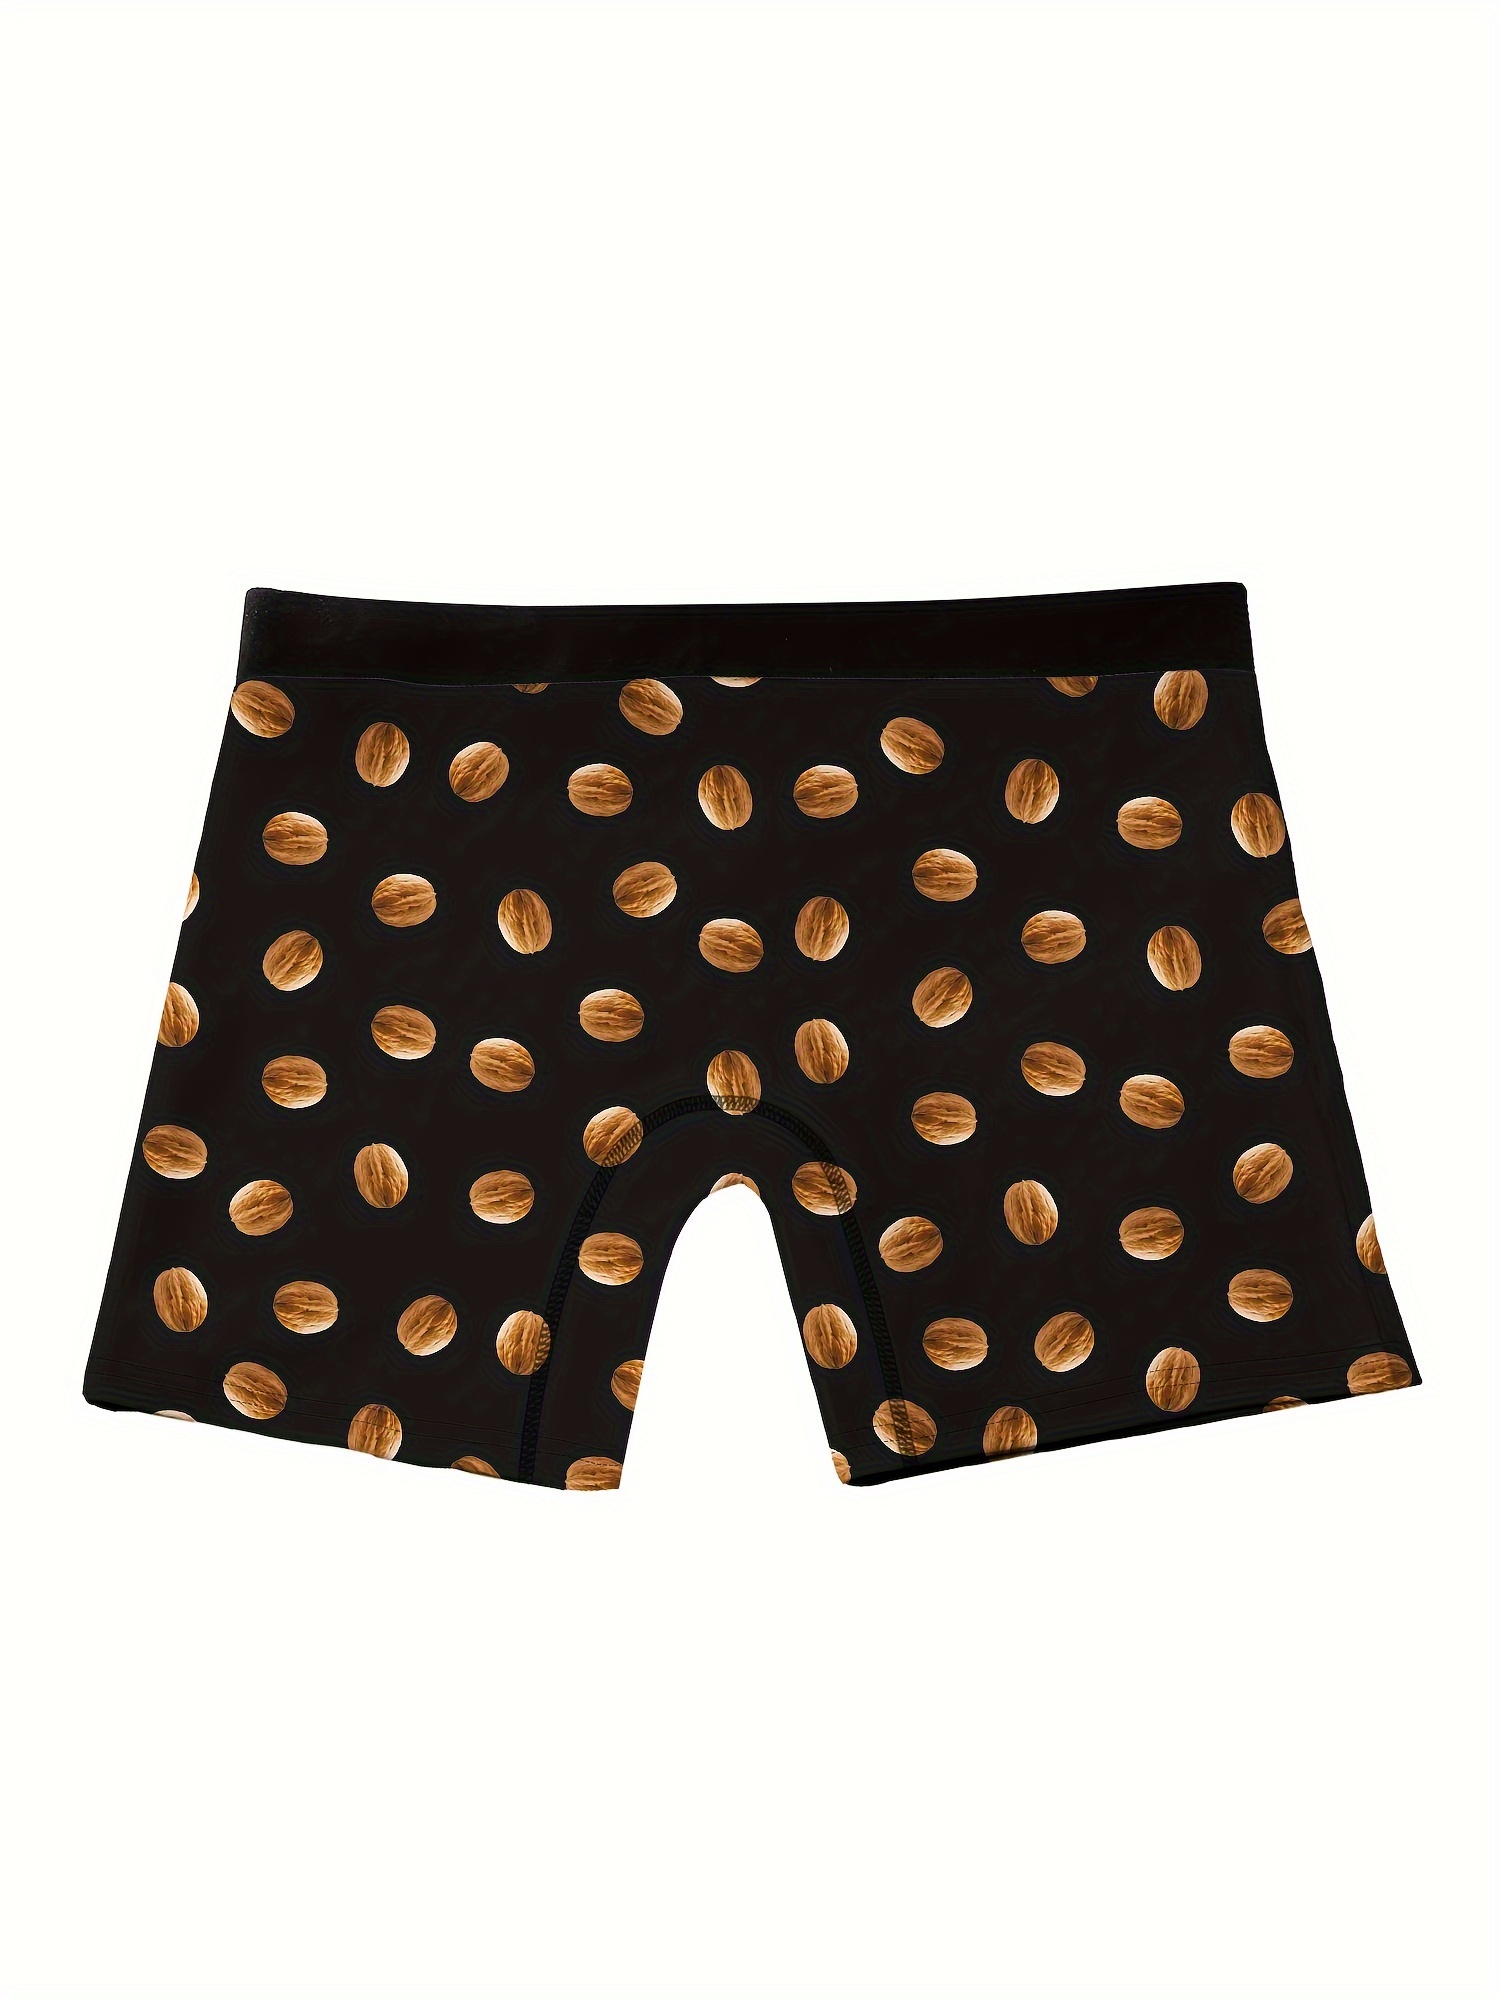 contains nuts print mens fashion novelty boxer briefs shorts breathable comfy high stretch boxer trunks mens underwear details 2